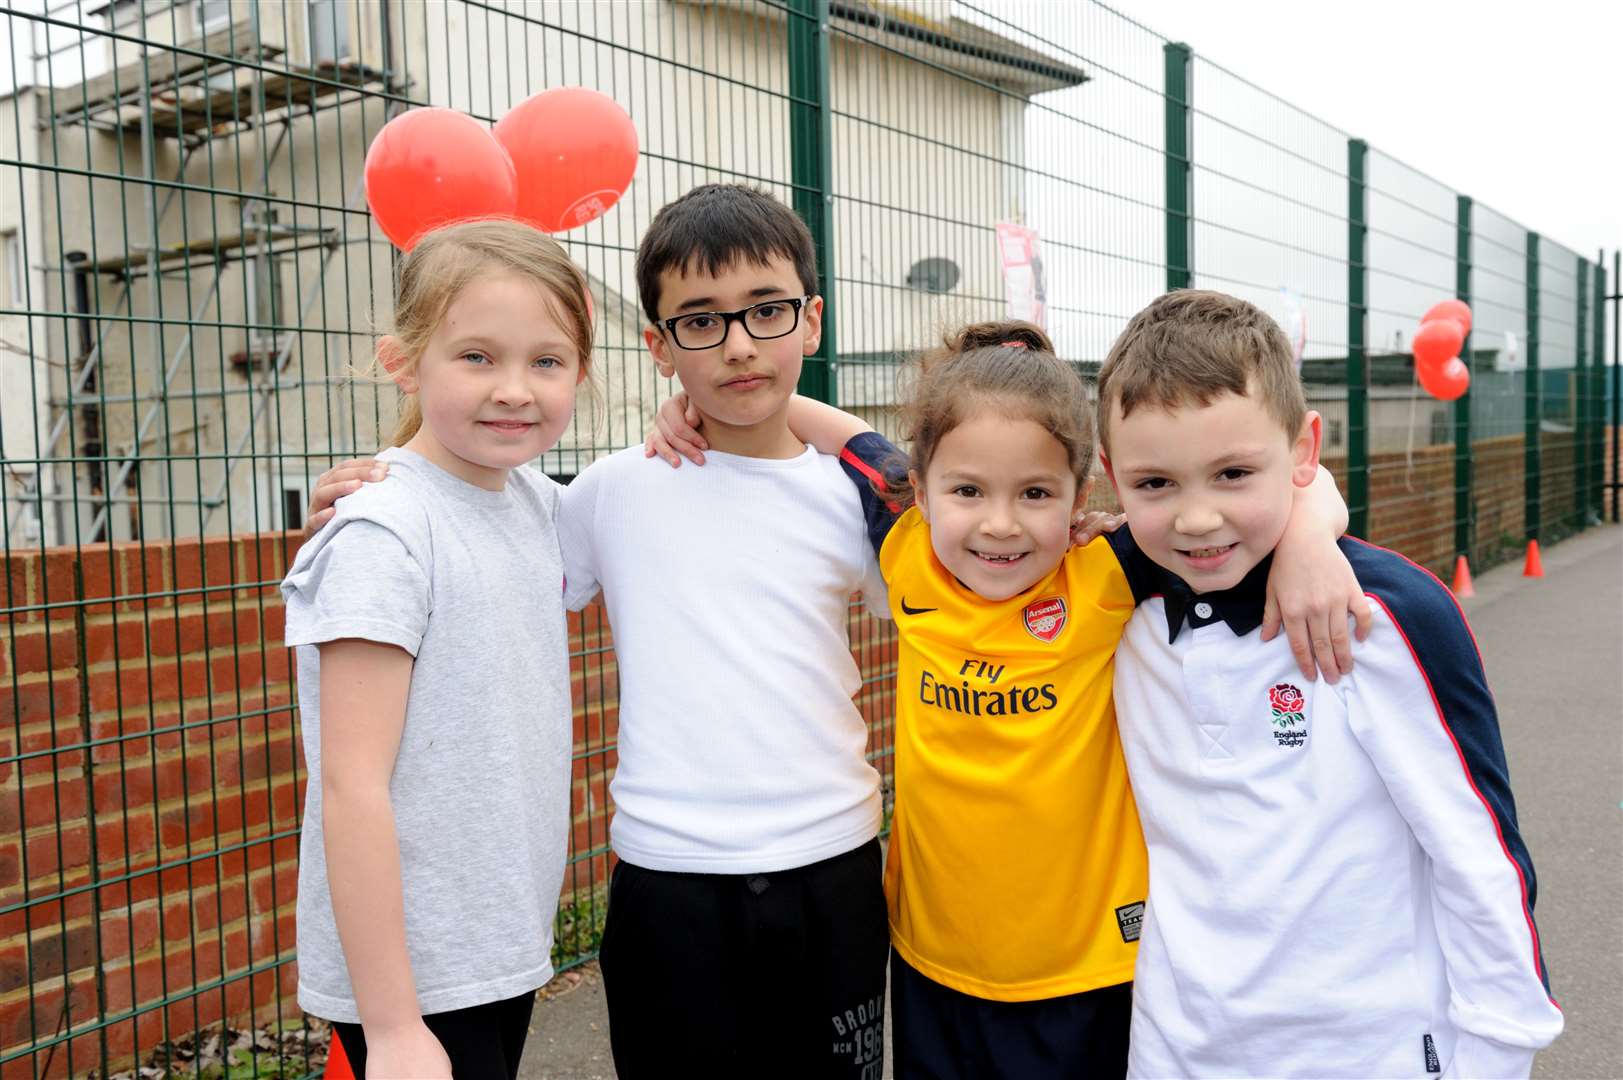 Pupils at Rosherville Primary School ran the Sport Relief Mile with a Smile. L/R, Kayleigh 7, Mohid 7, Mia 6, Leon 6.